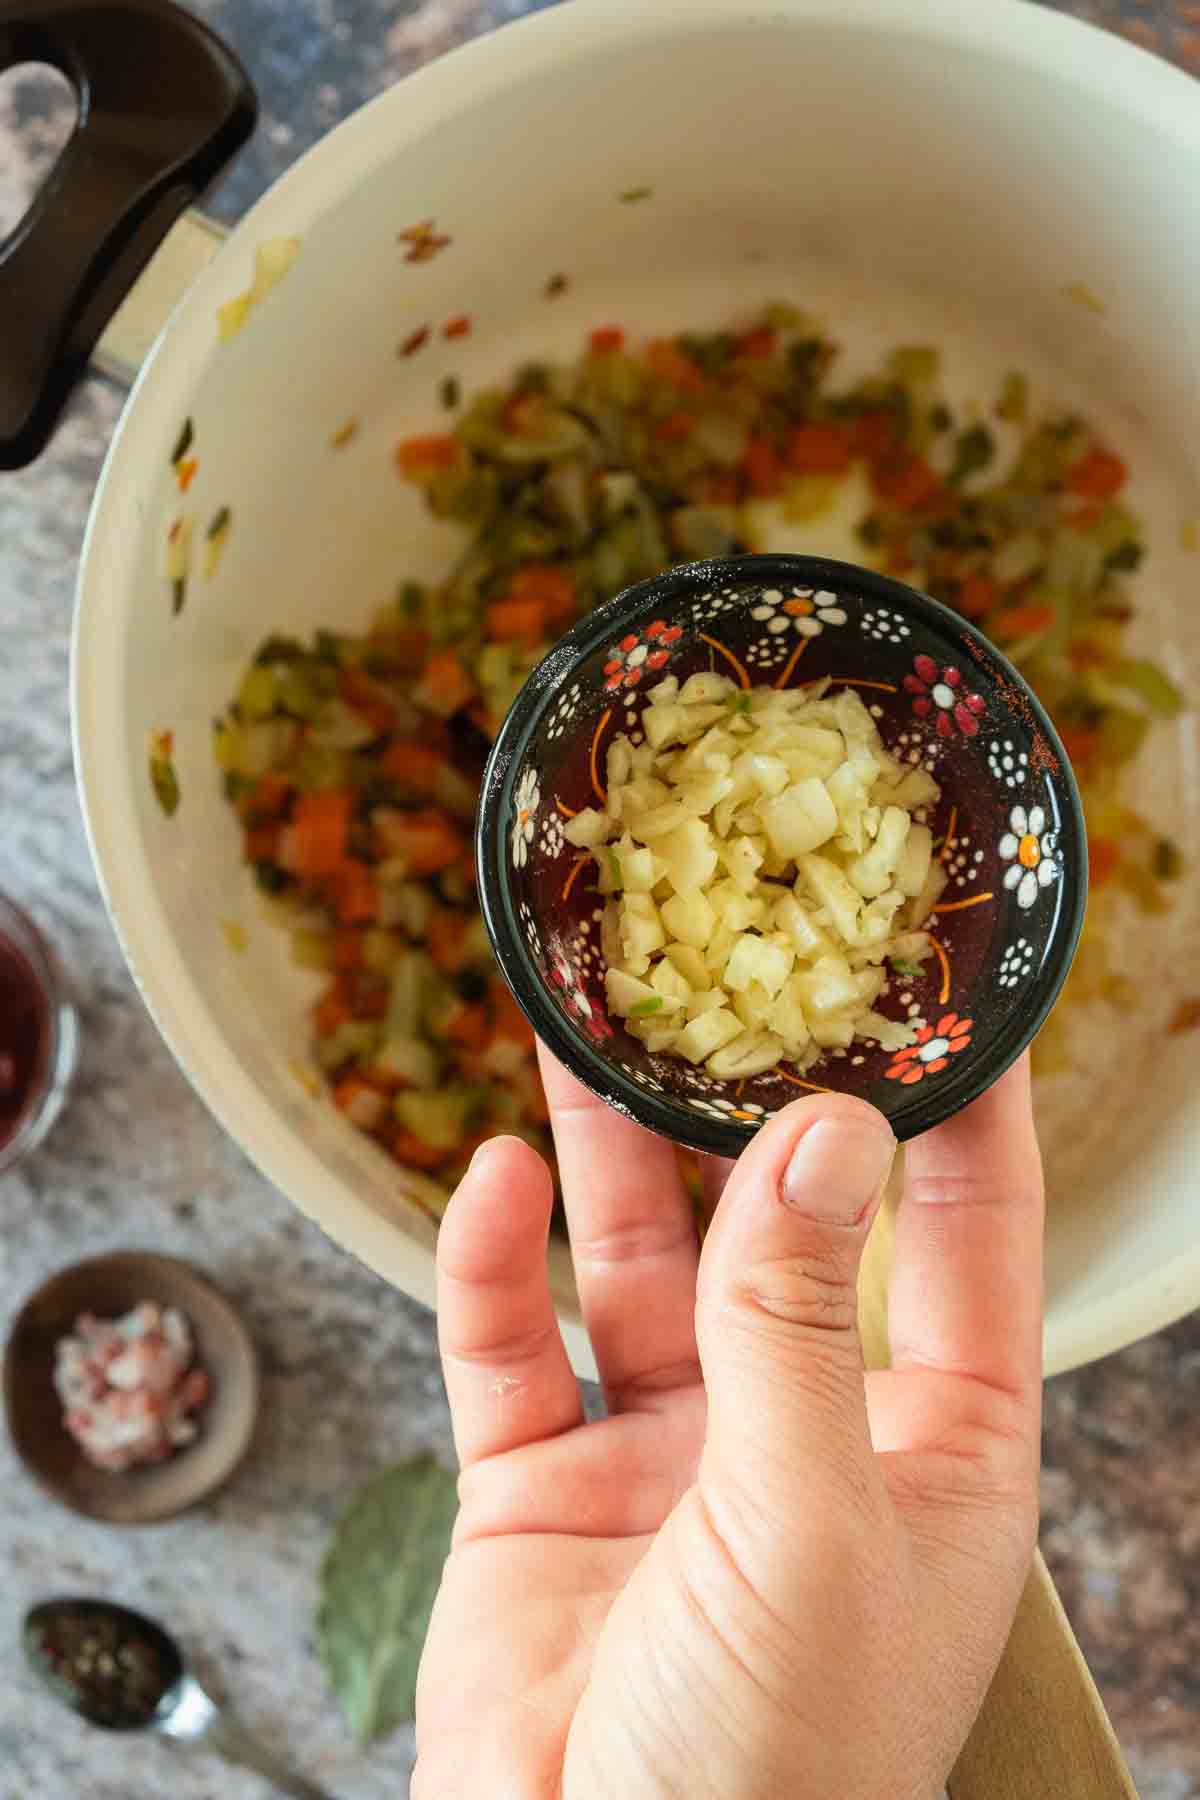 Minced garlic in small bowl being added to large pot full of diced, hot vegetables.